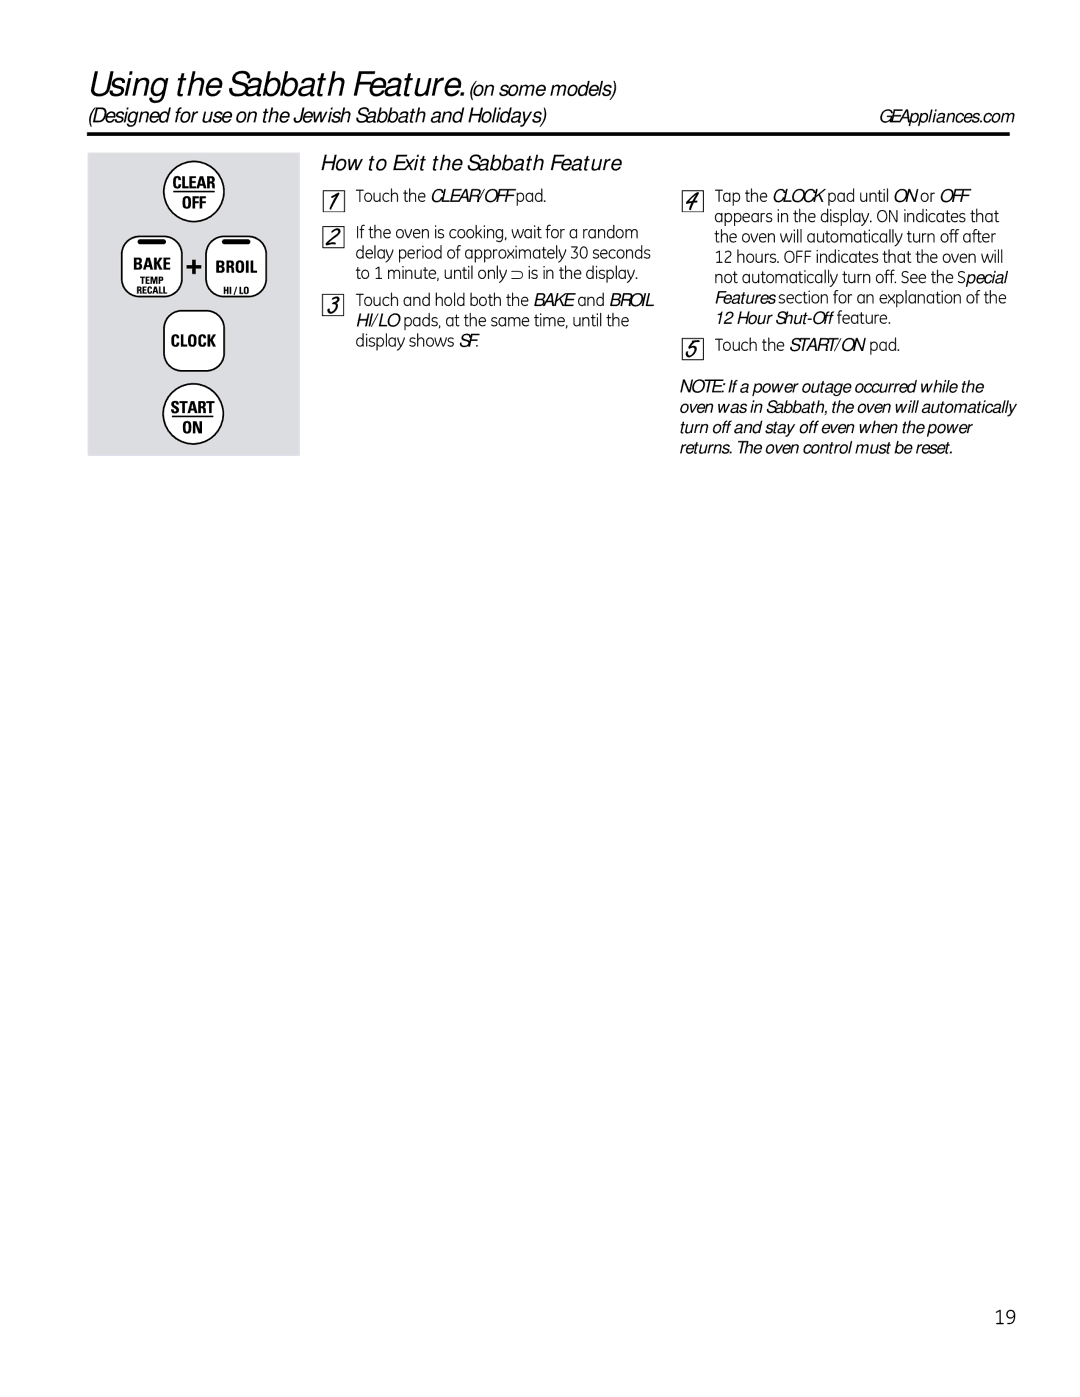 GE RB790 How to Exit the Sabbath Feature, Designed for use on the Jewish Sabbath and Holidays, Touch the CLEAR/OFF pad 